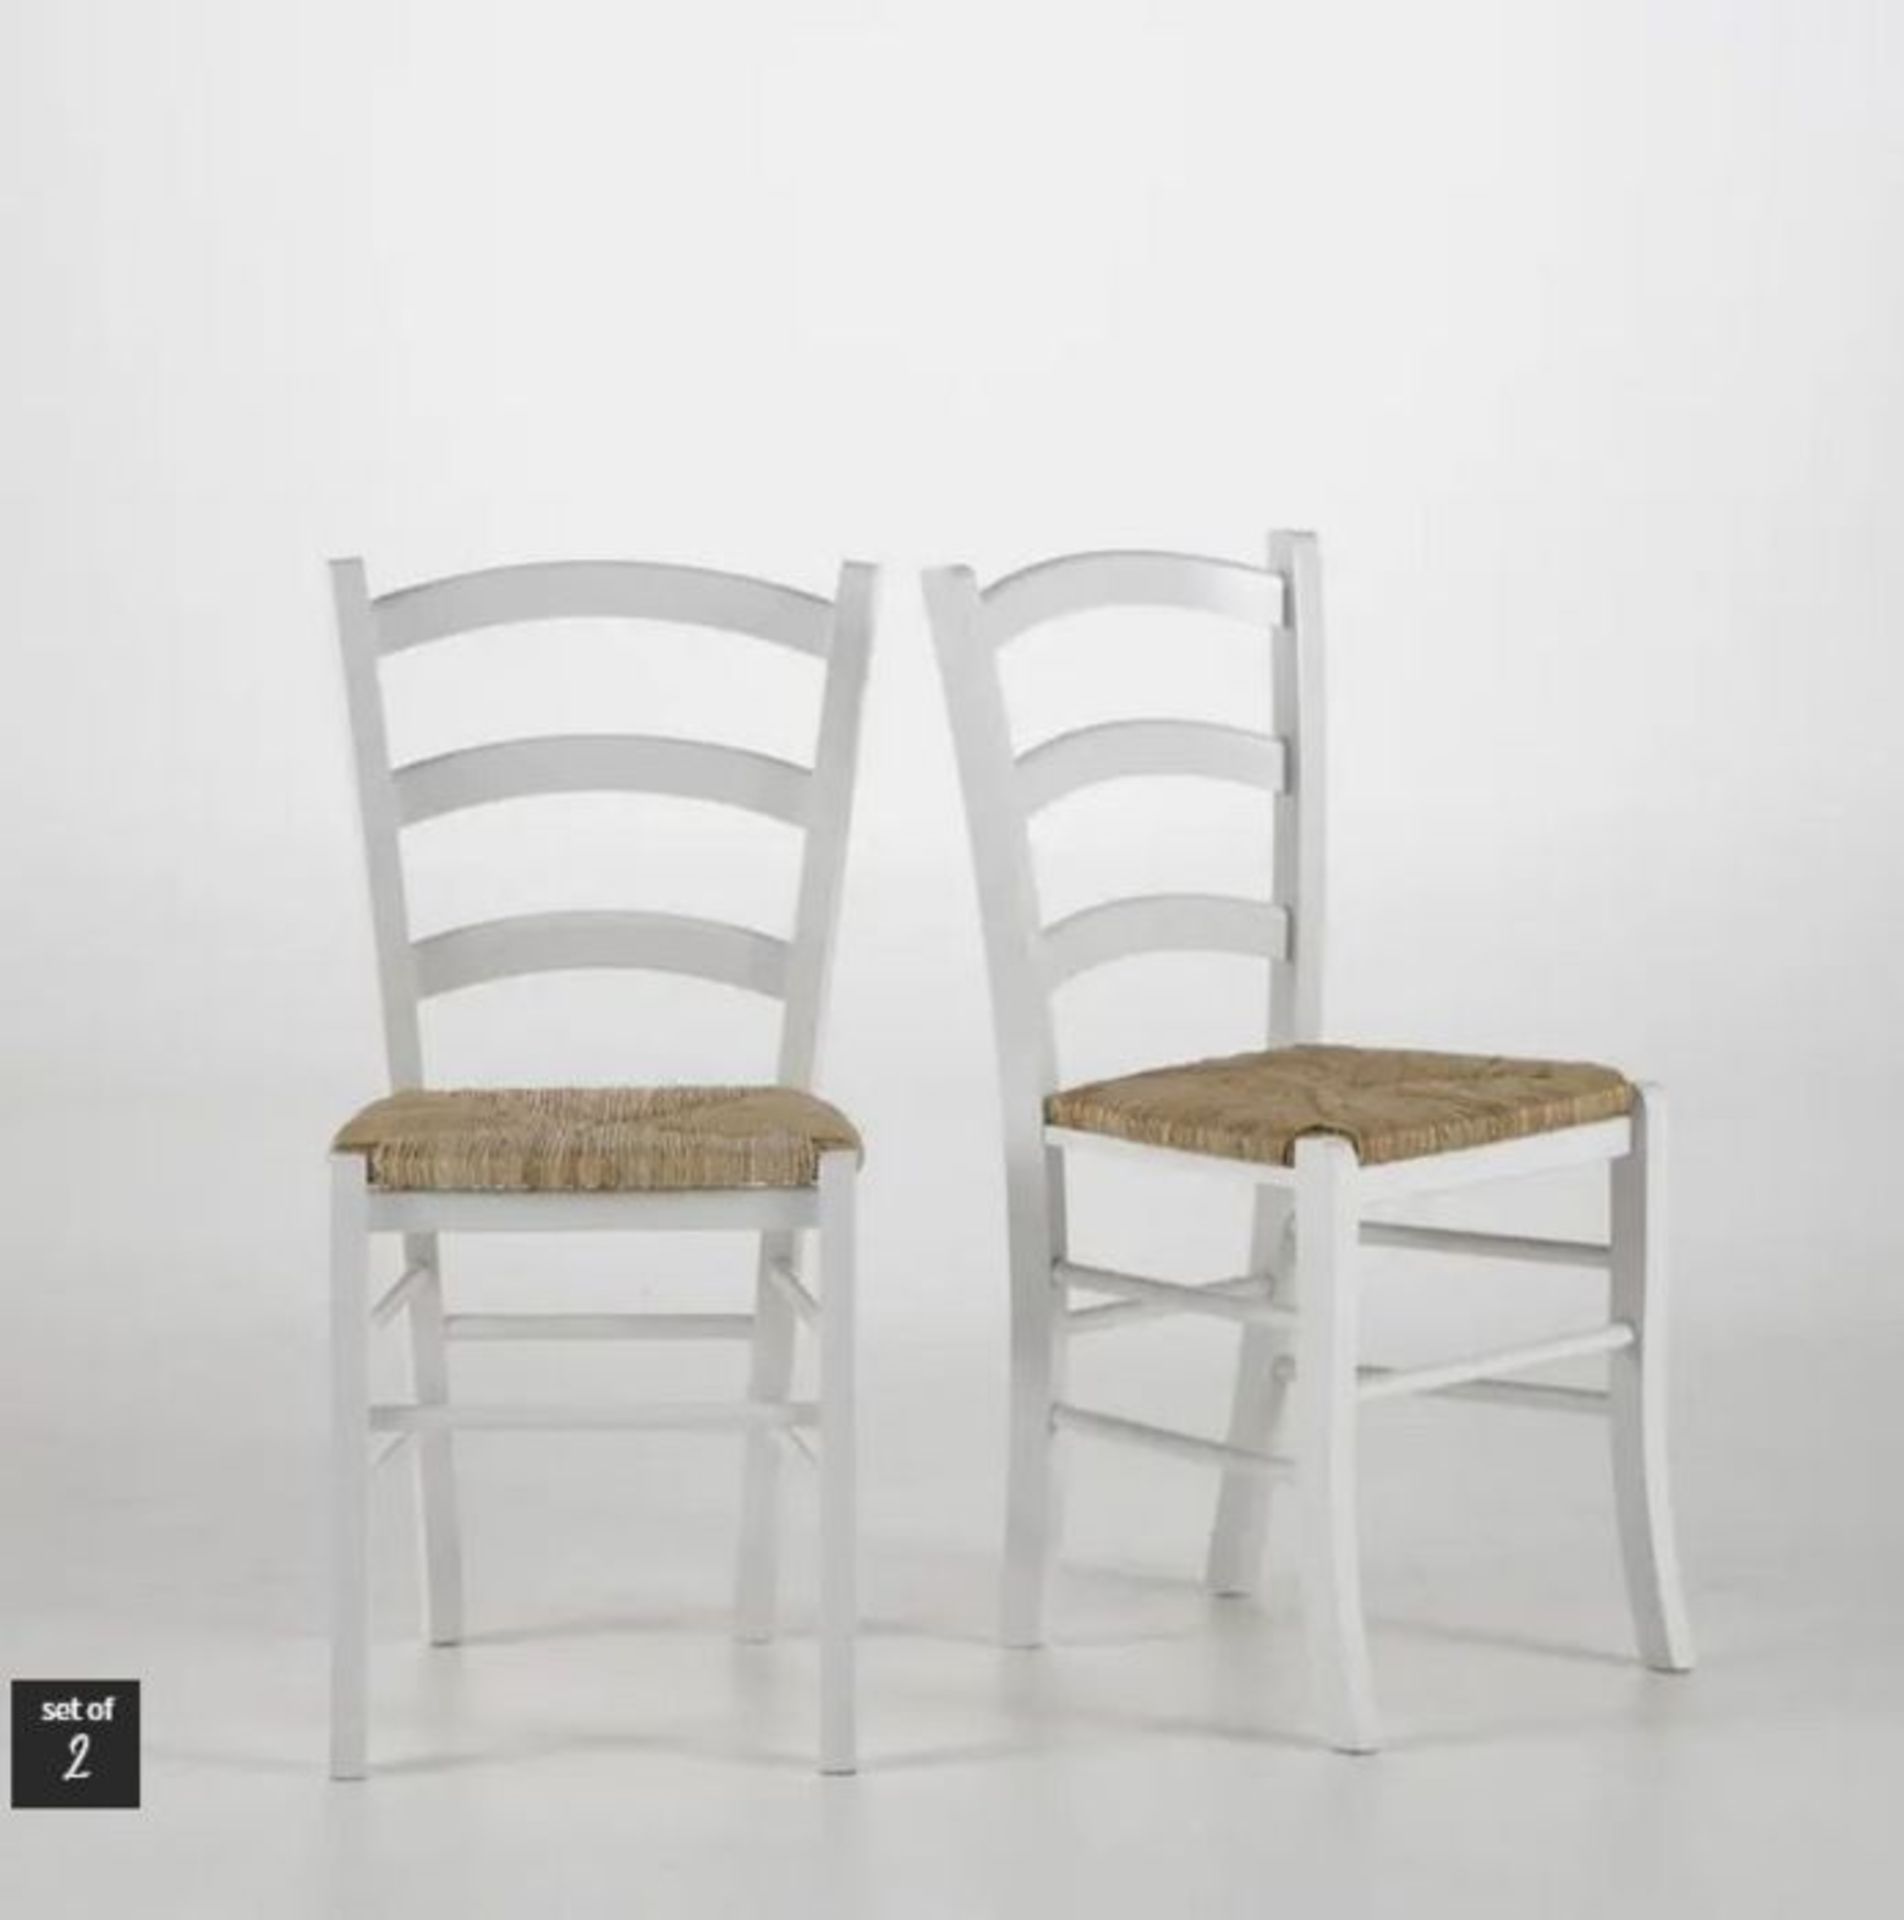 LA REDOUTE SET OF 2 PERRINE COUNTRY-STYLE CHAIRS